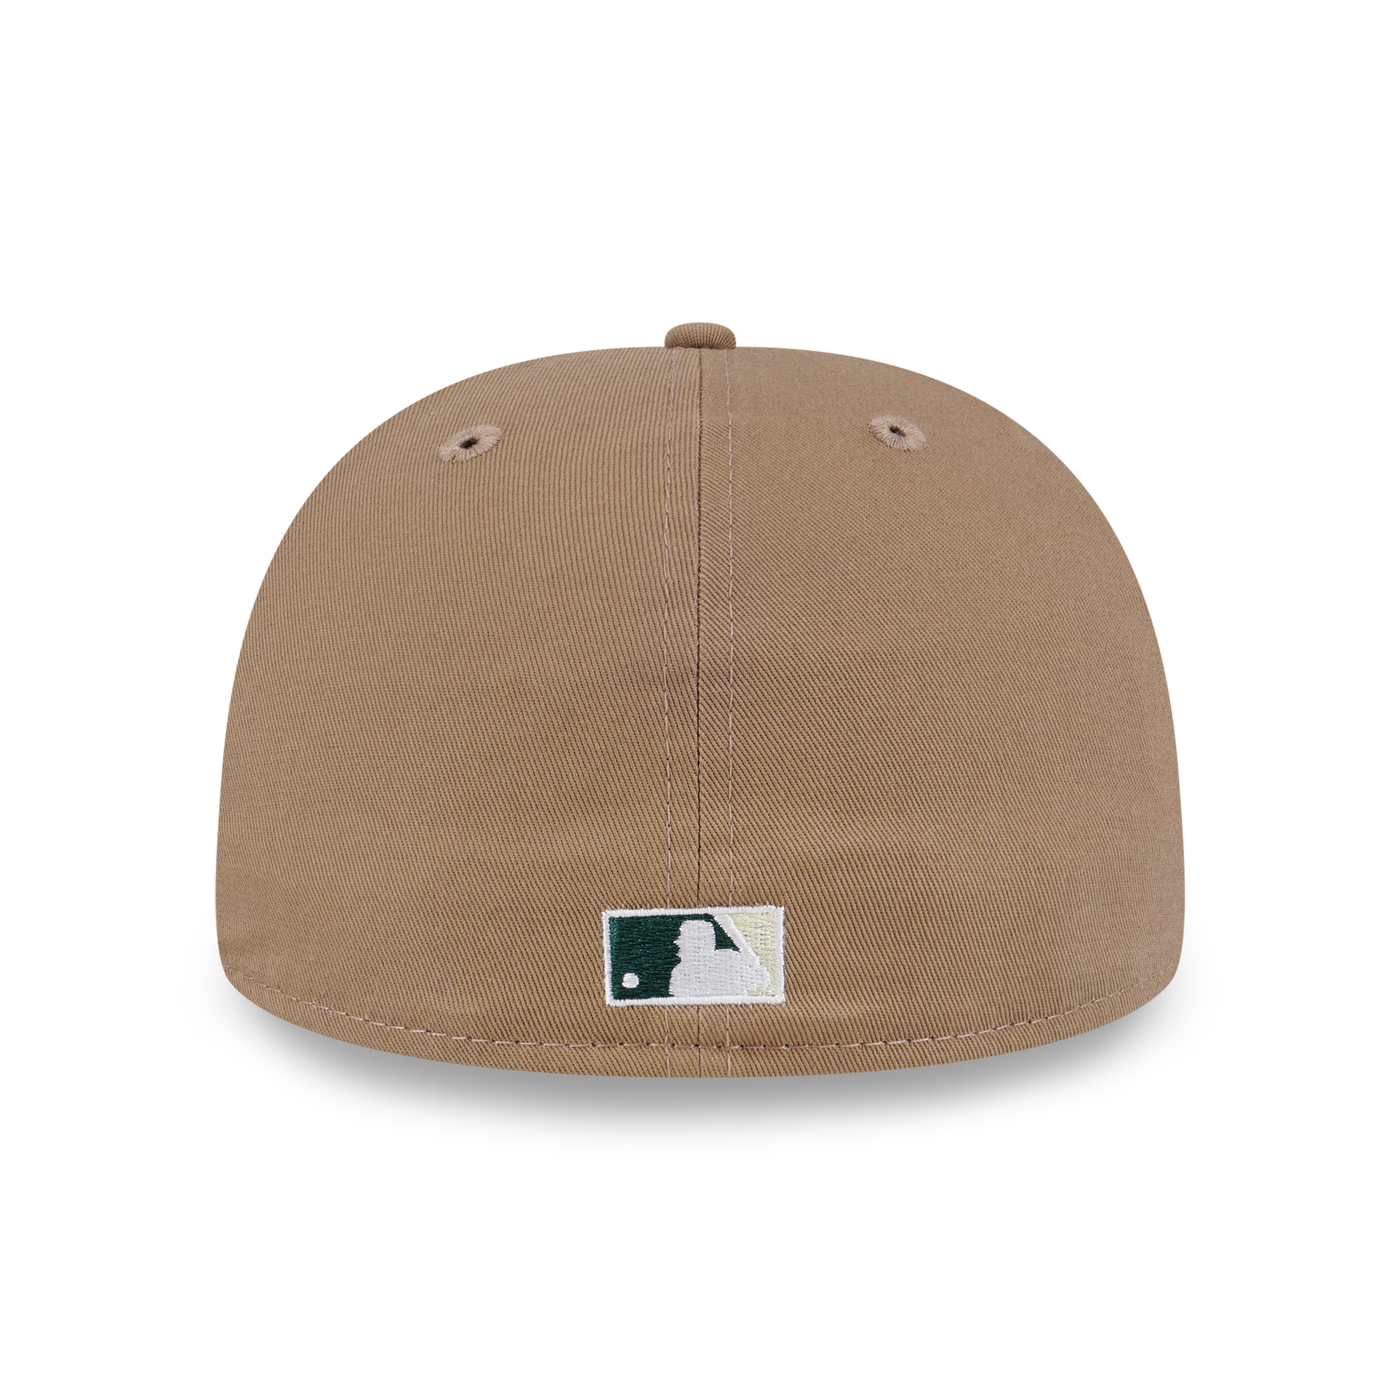 59FIFTY PACK - LEMON TEA BOSTON RED SOX COOPERSTOWN KHAKI 59FIFTY CAP